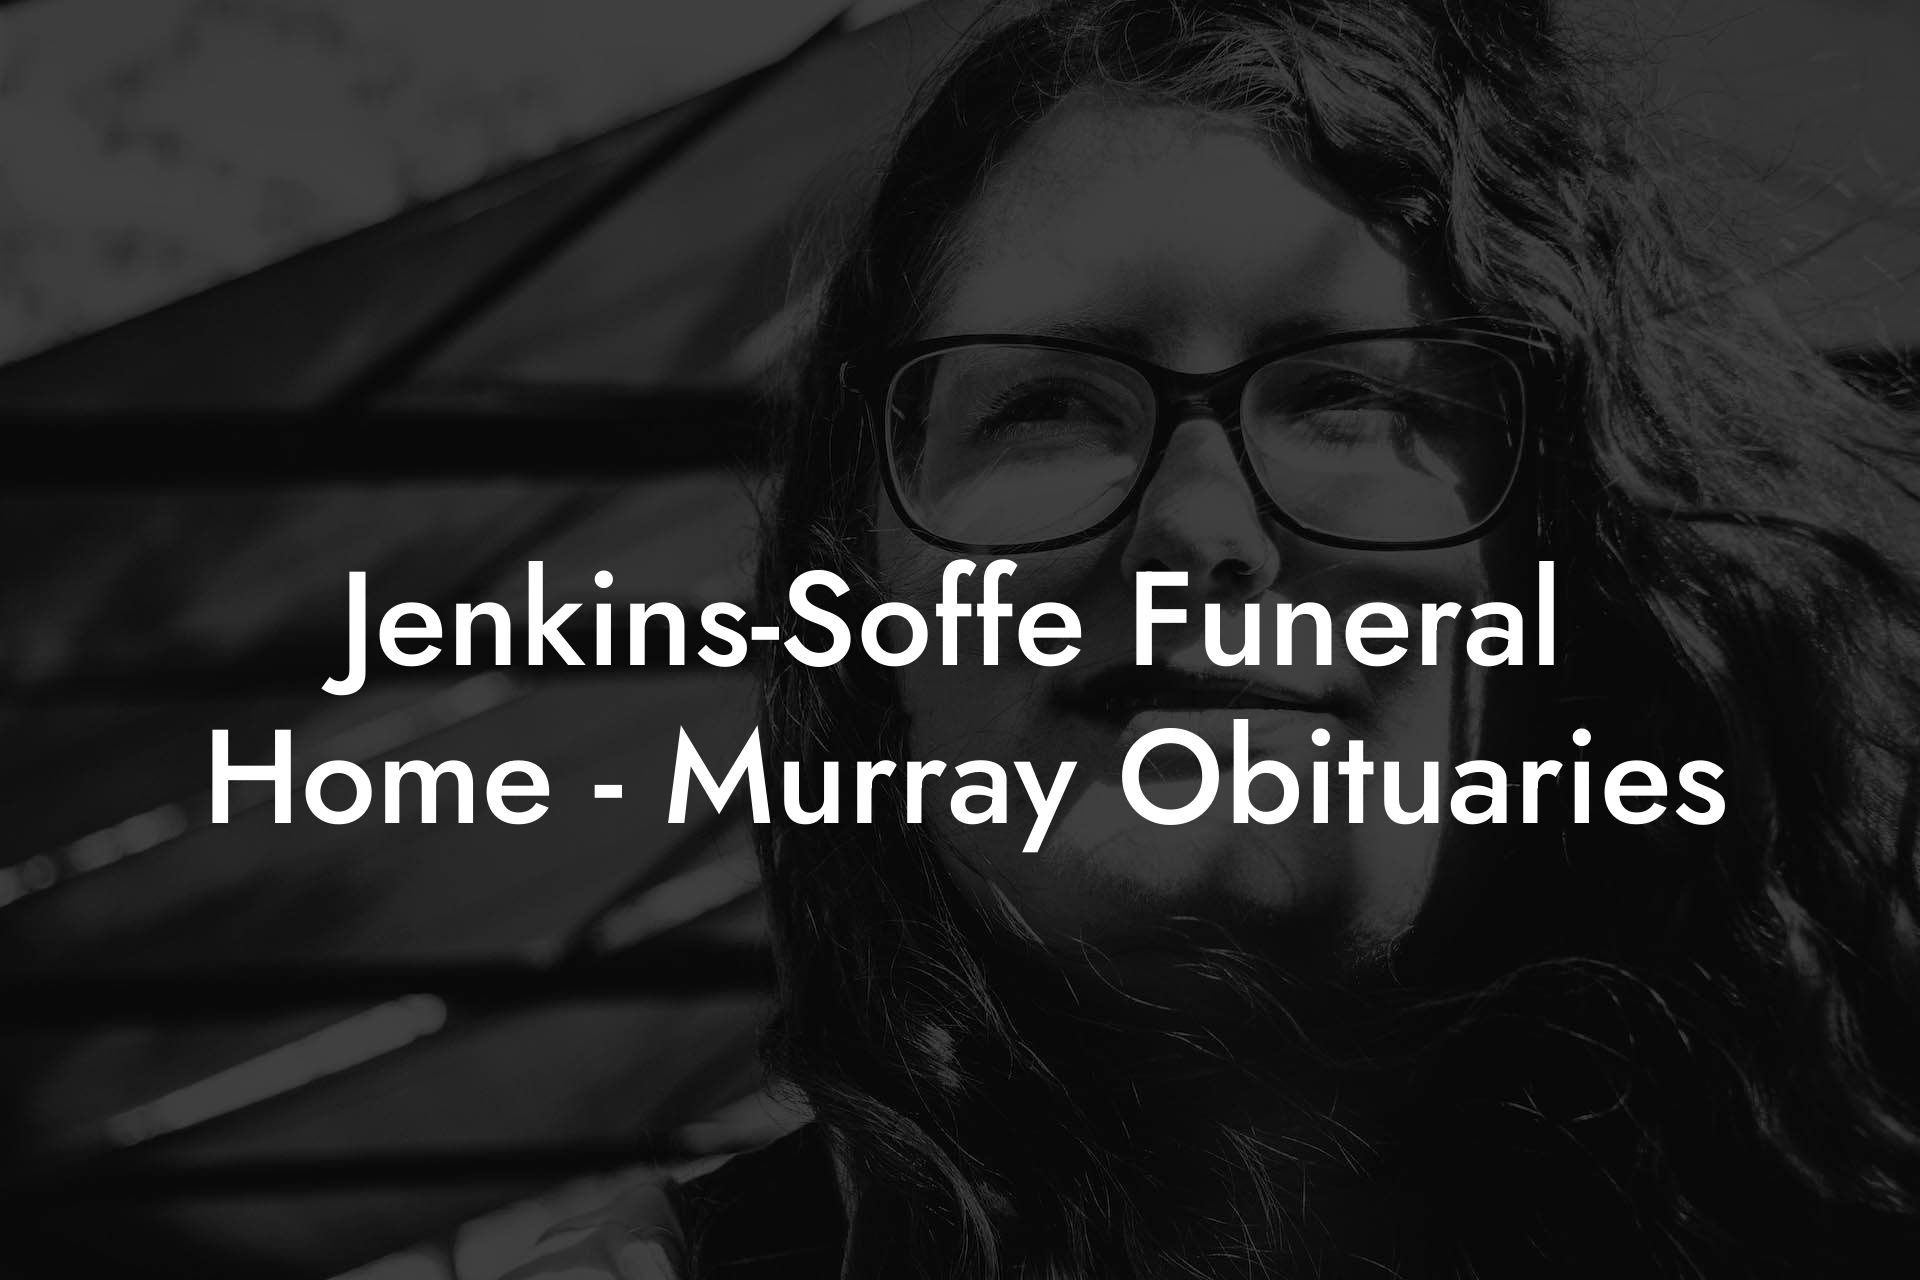 Jenkins-Soffe Funeral Home - Murray Obituaries